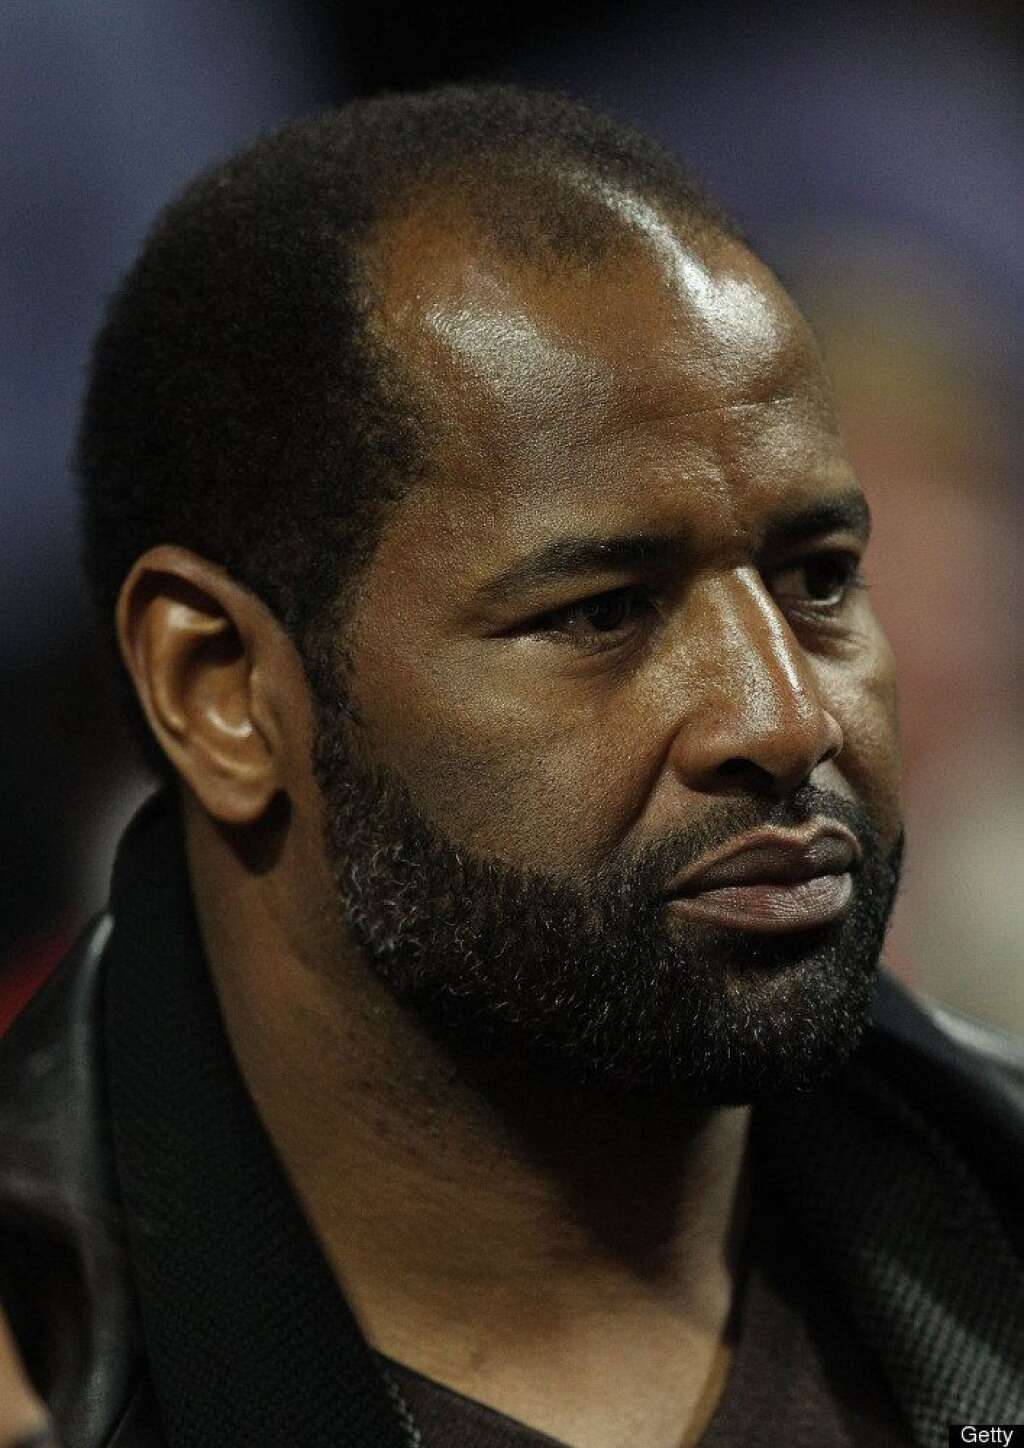 Richard Dent - Dent was hit with a $1,160,056 federal tax lien in March 2011. The former Chicago Bears player was elected into the Pro Football Hall of Fame one month prior.